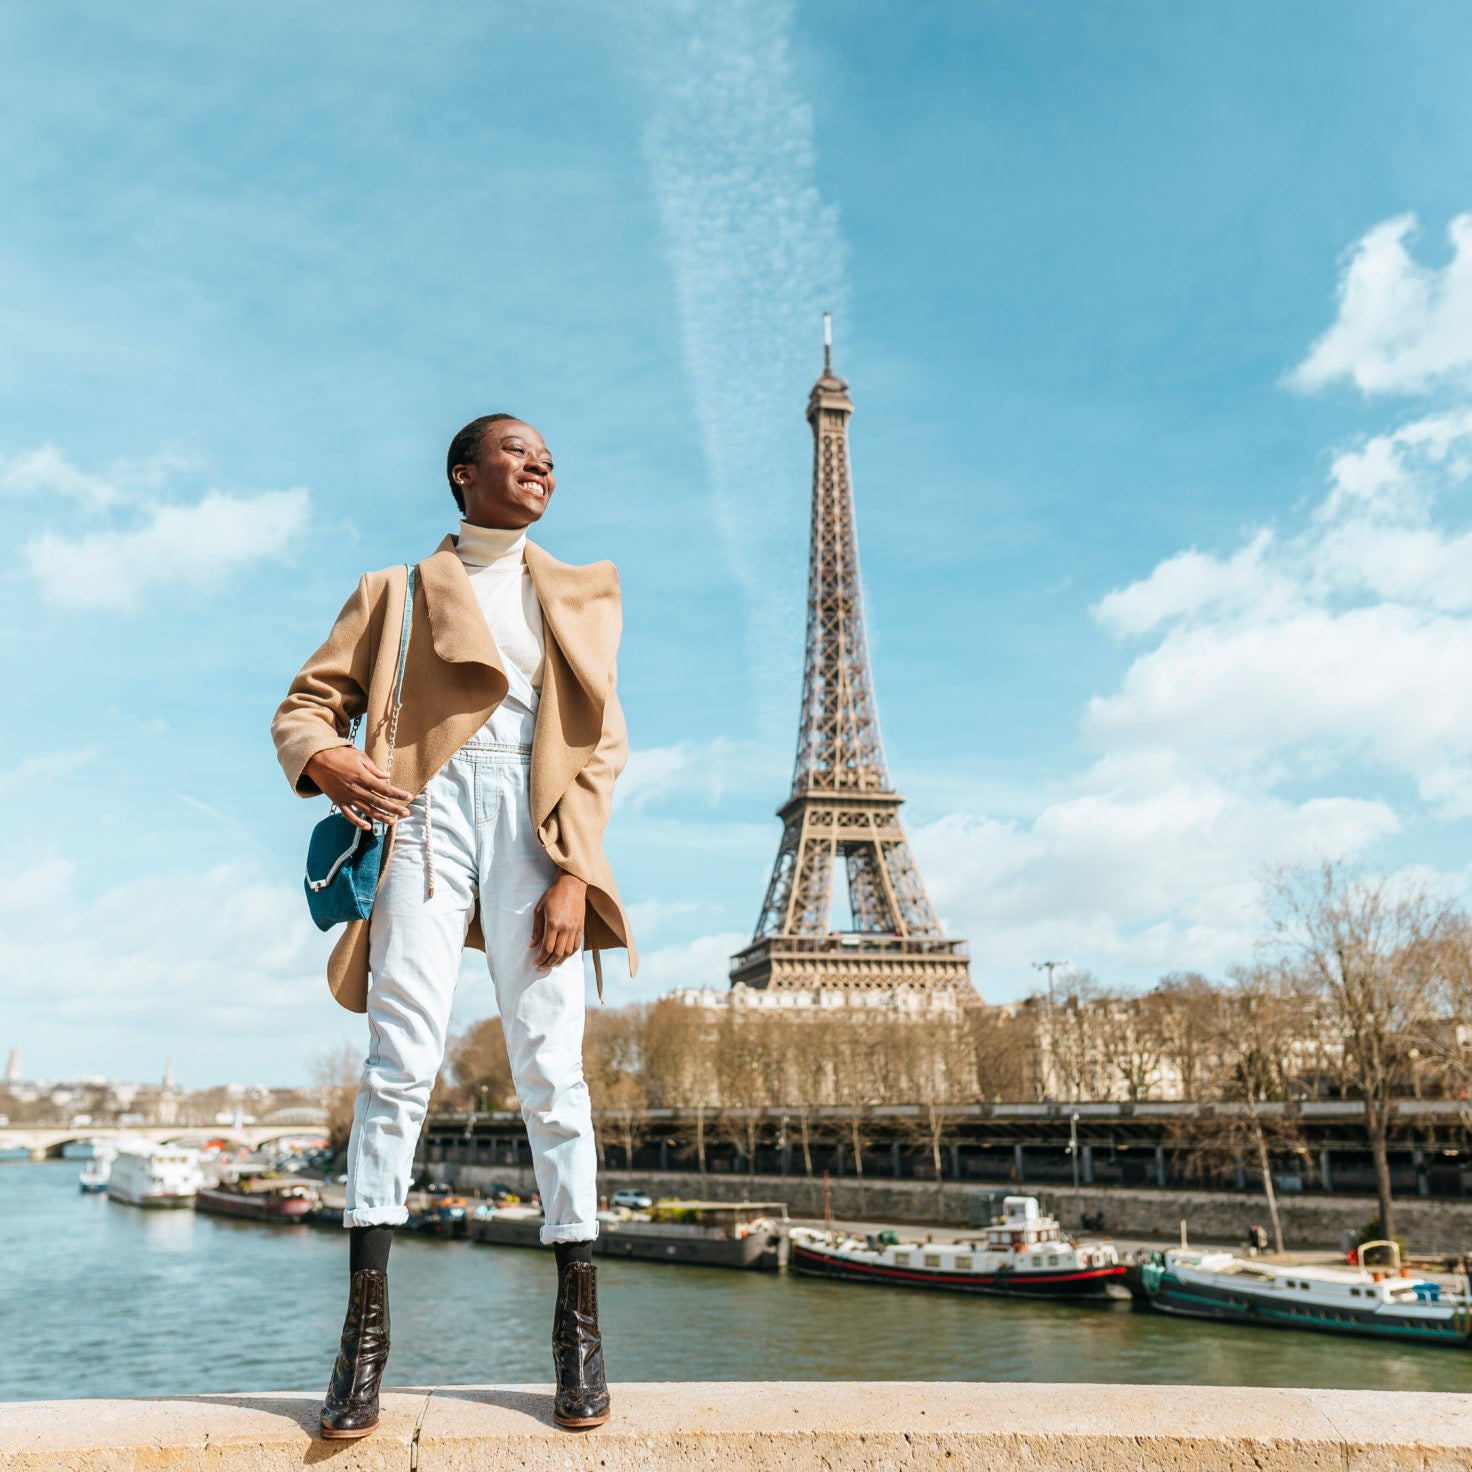 Trending in Travel: Free Accommodations, Foodie Museums, $247 Flights To Paris, And More!